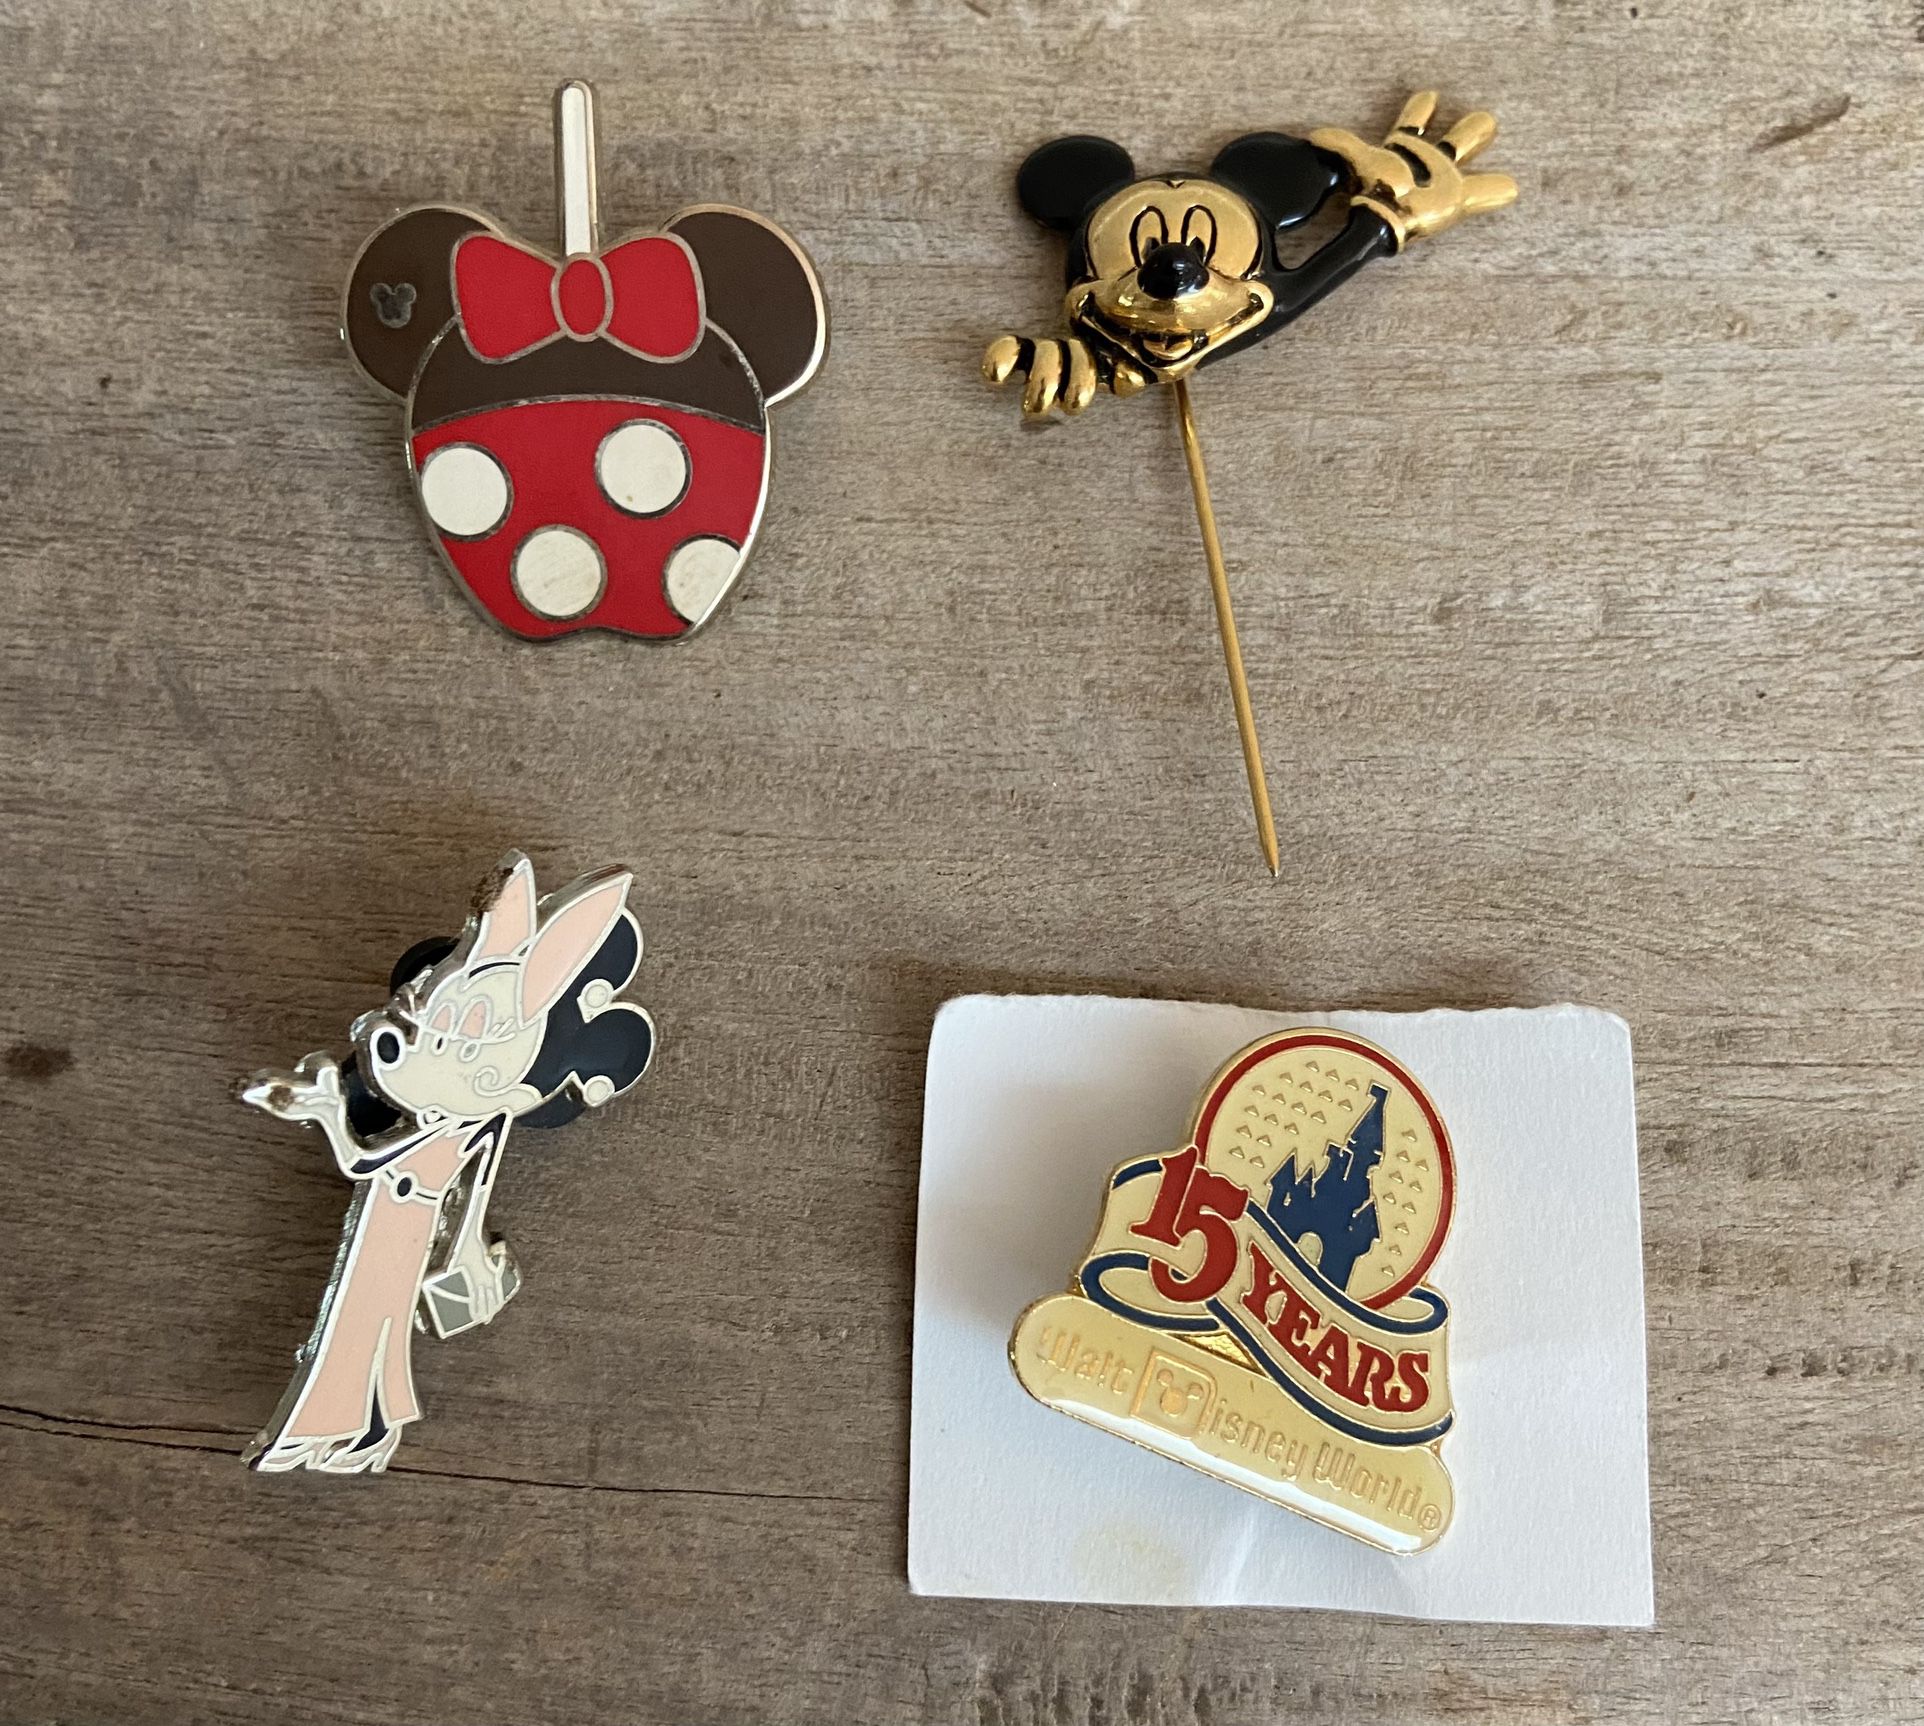 Disney Pins Collectible $8 for All